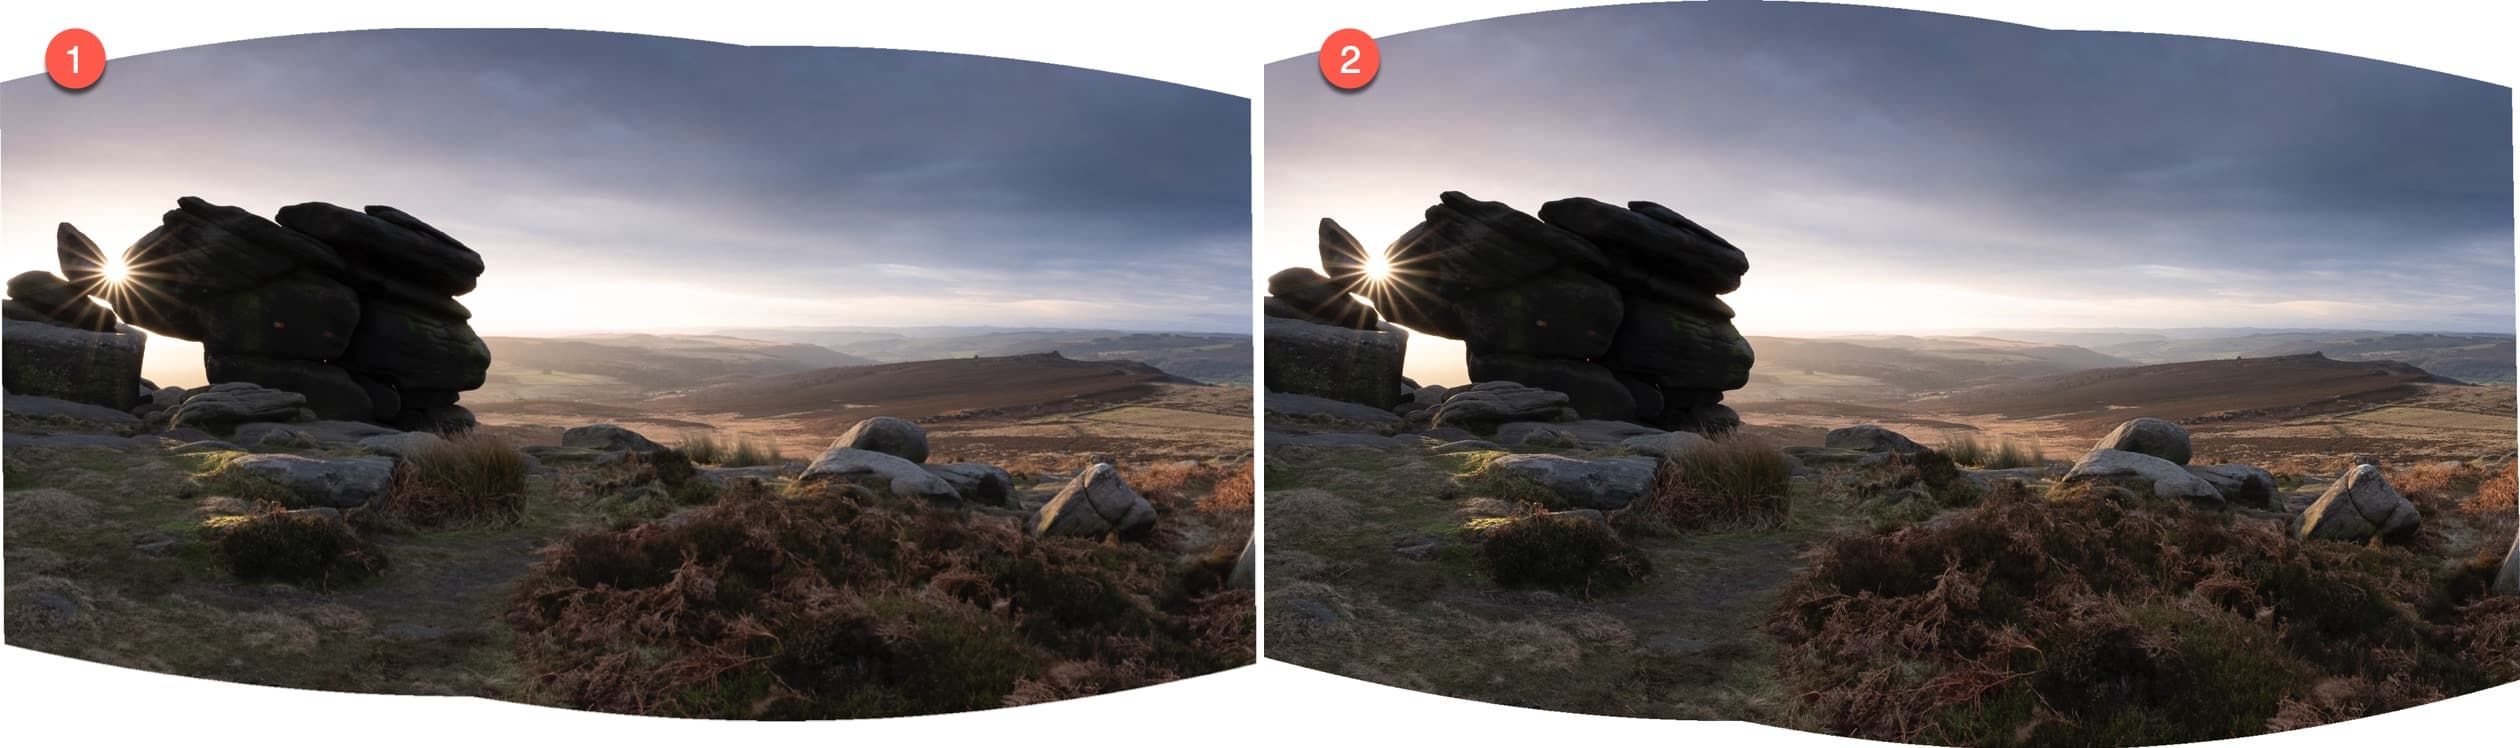 Comparison of Spherical and Cylindrical projections when stitching images in Lightroom